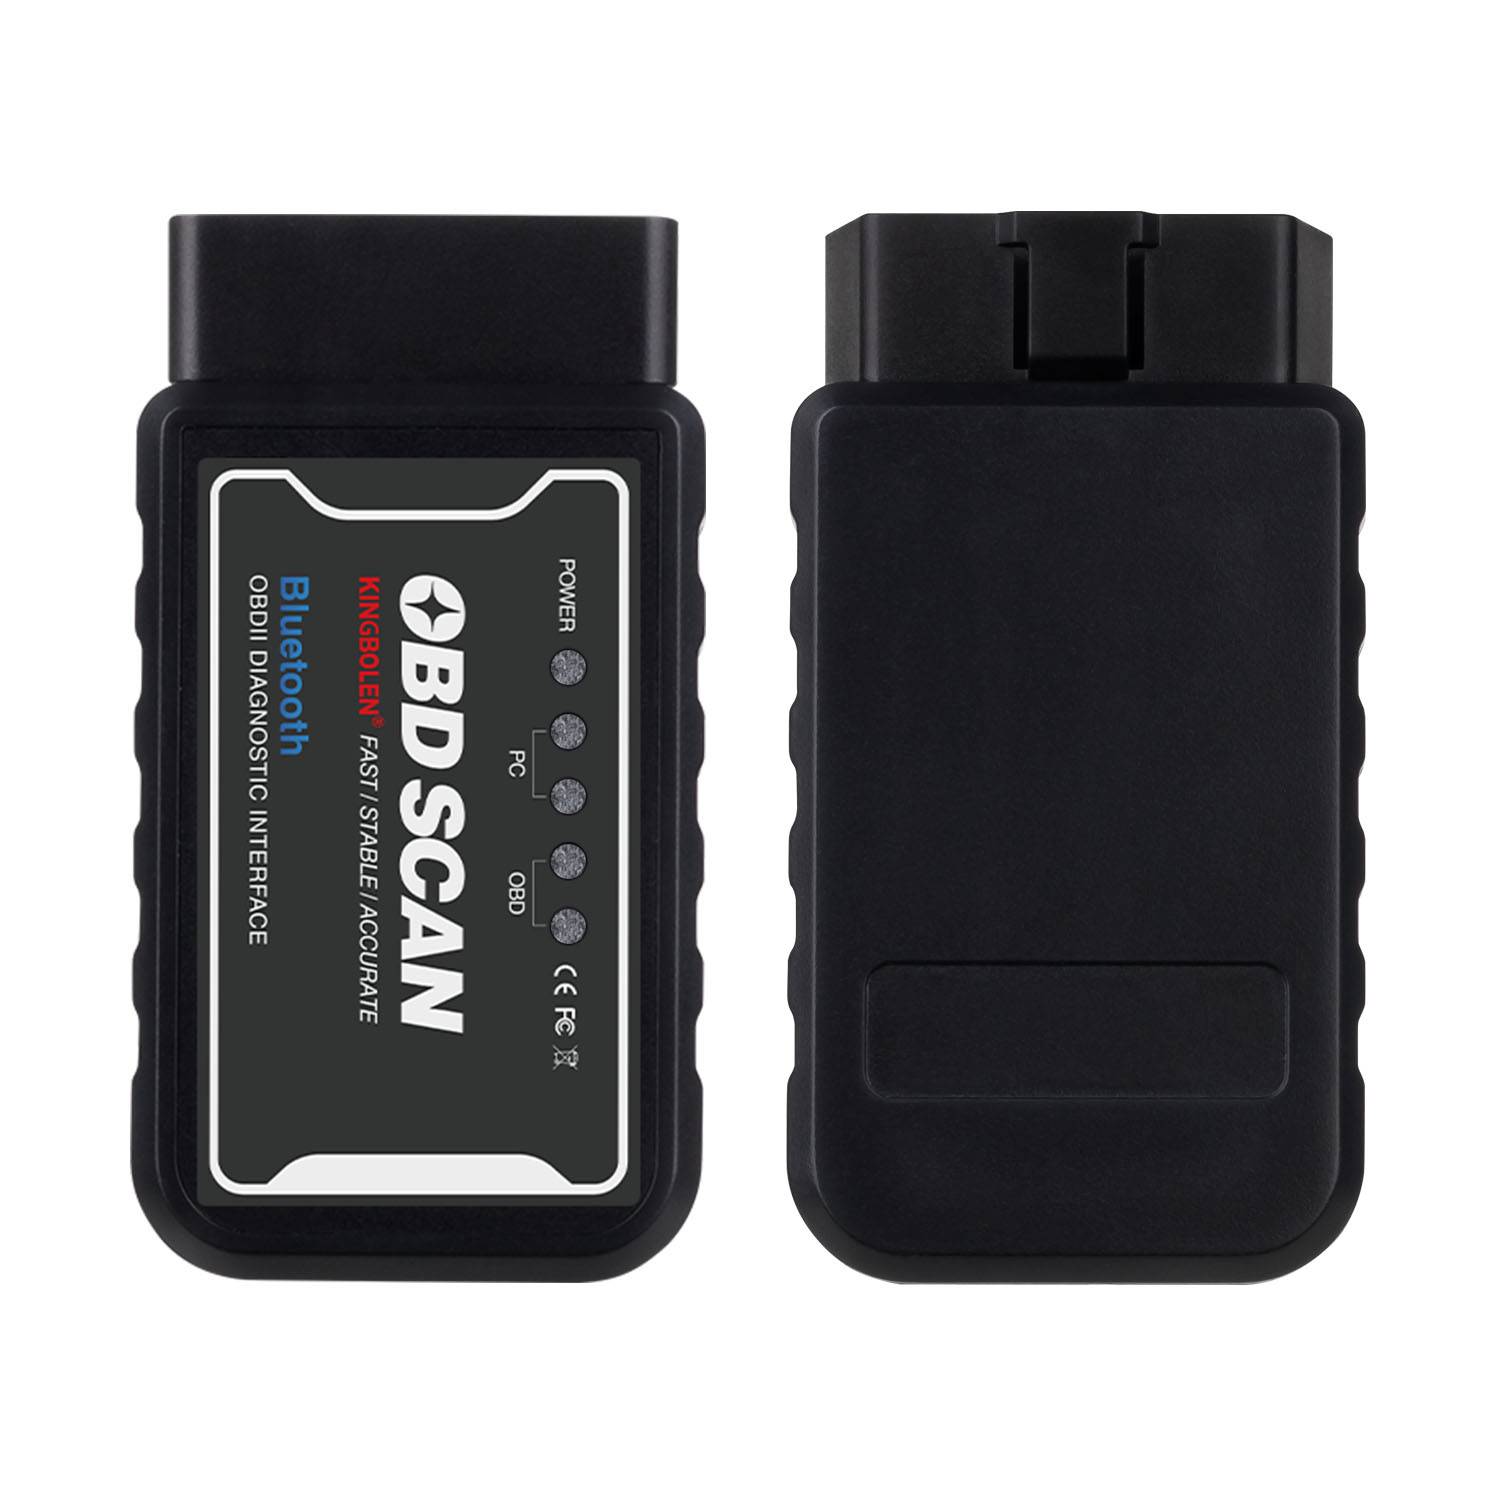 LAUNCH Bluetooth DS150E DS150 CDP PRO OBD2 Diagnostic Tool for Cars/Trucks  - Launch X431 Mall